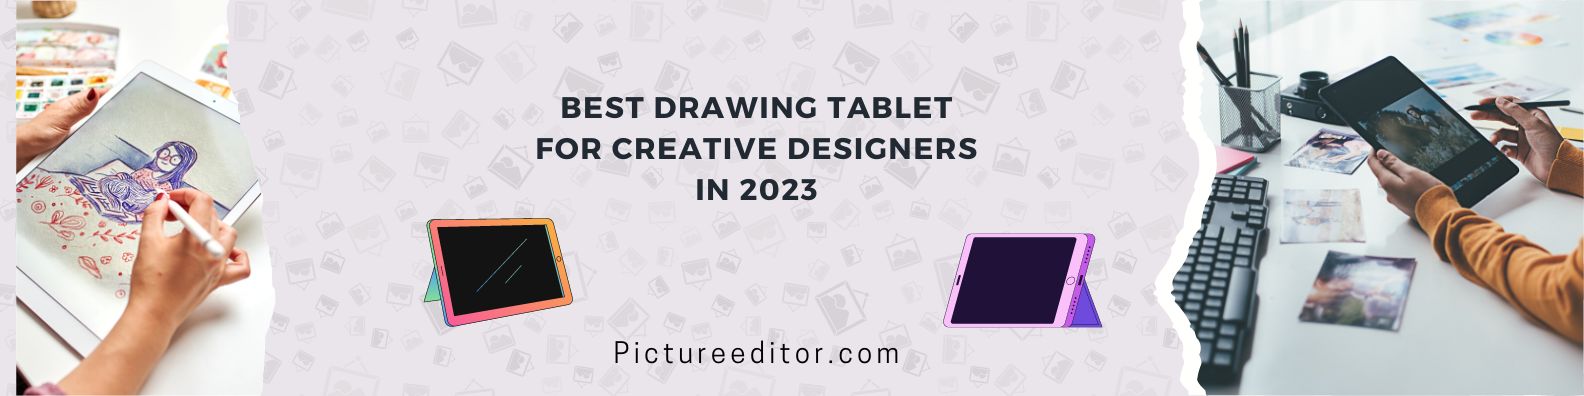 Best Drawing Tablet For Creative Designers In 2023